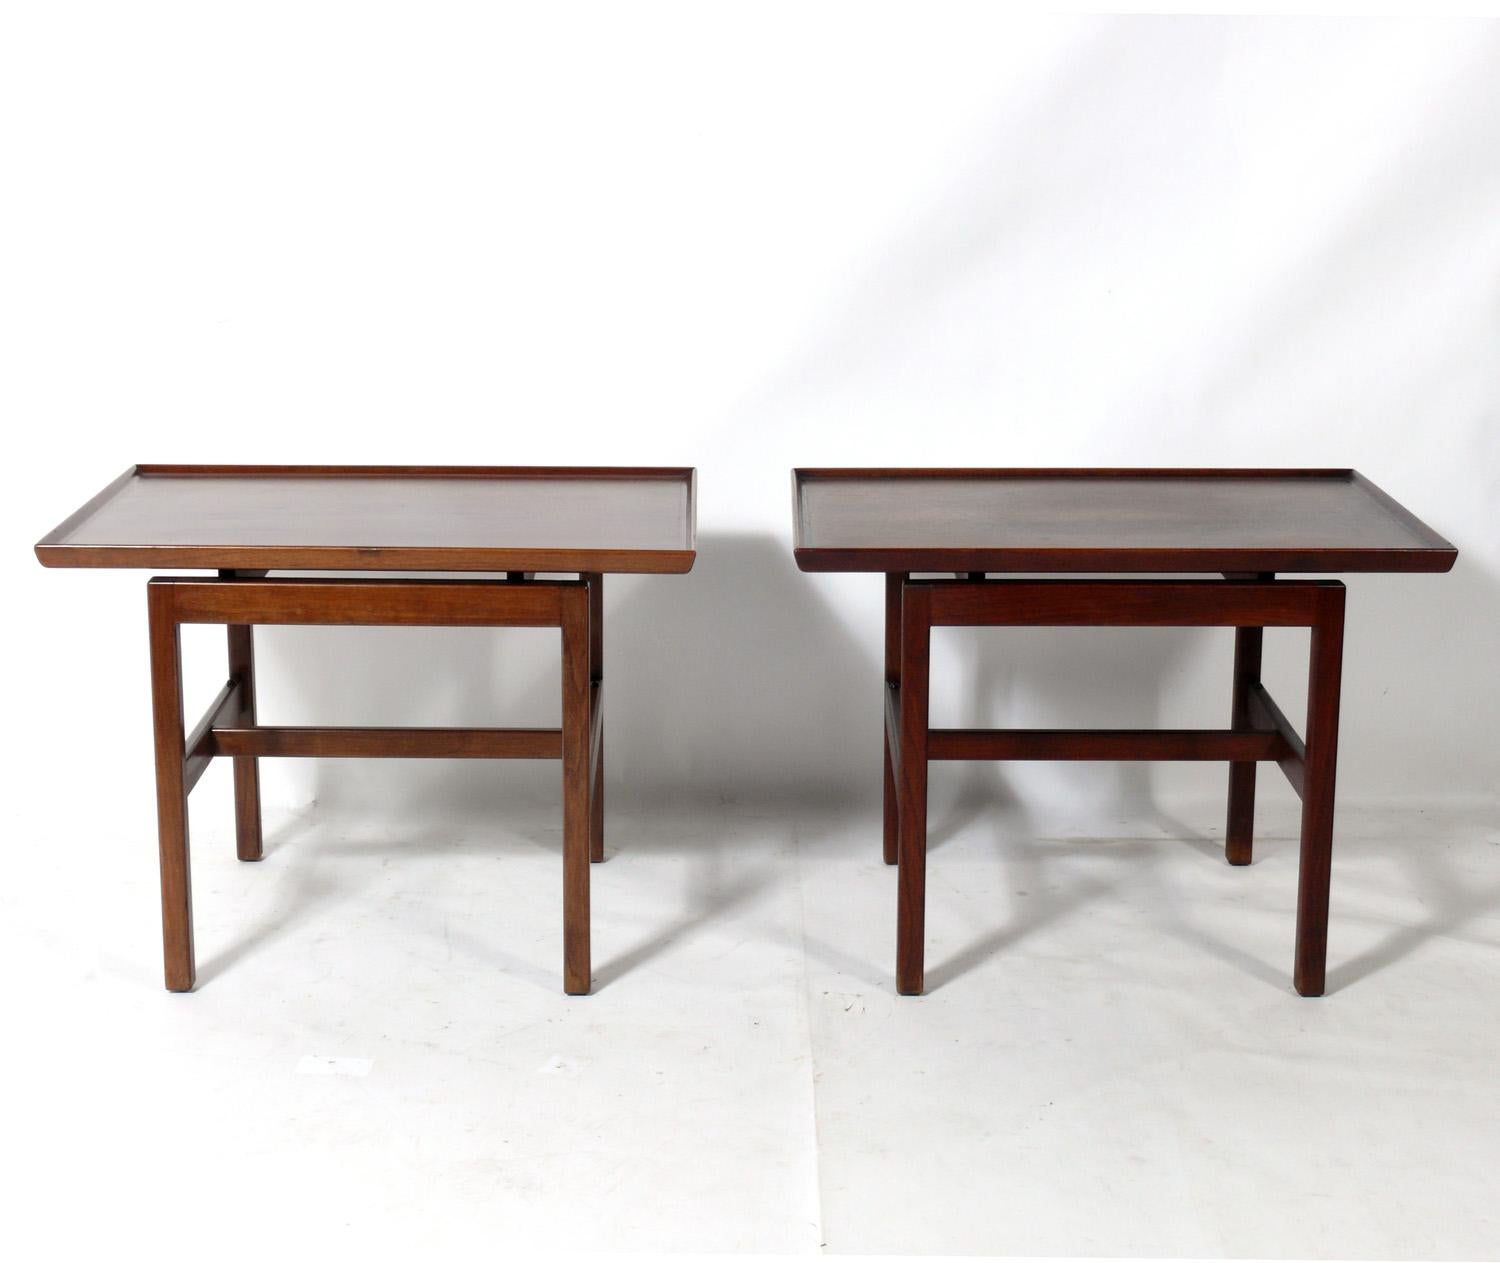 Pair of clean lined mid century walnut side tables or night stands, designed by Jens Risom, circa 1960s. They are being refinished and will look amazing when completed. The price noted includes refinishing. They have glass shelves at the bottom.